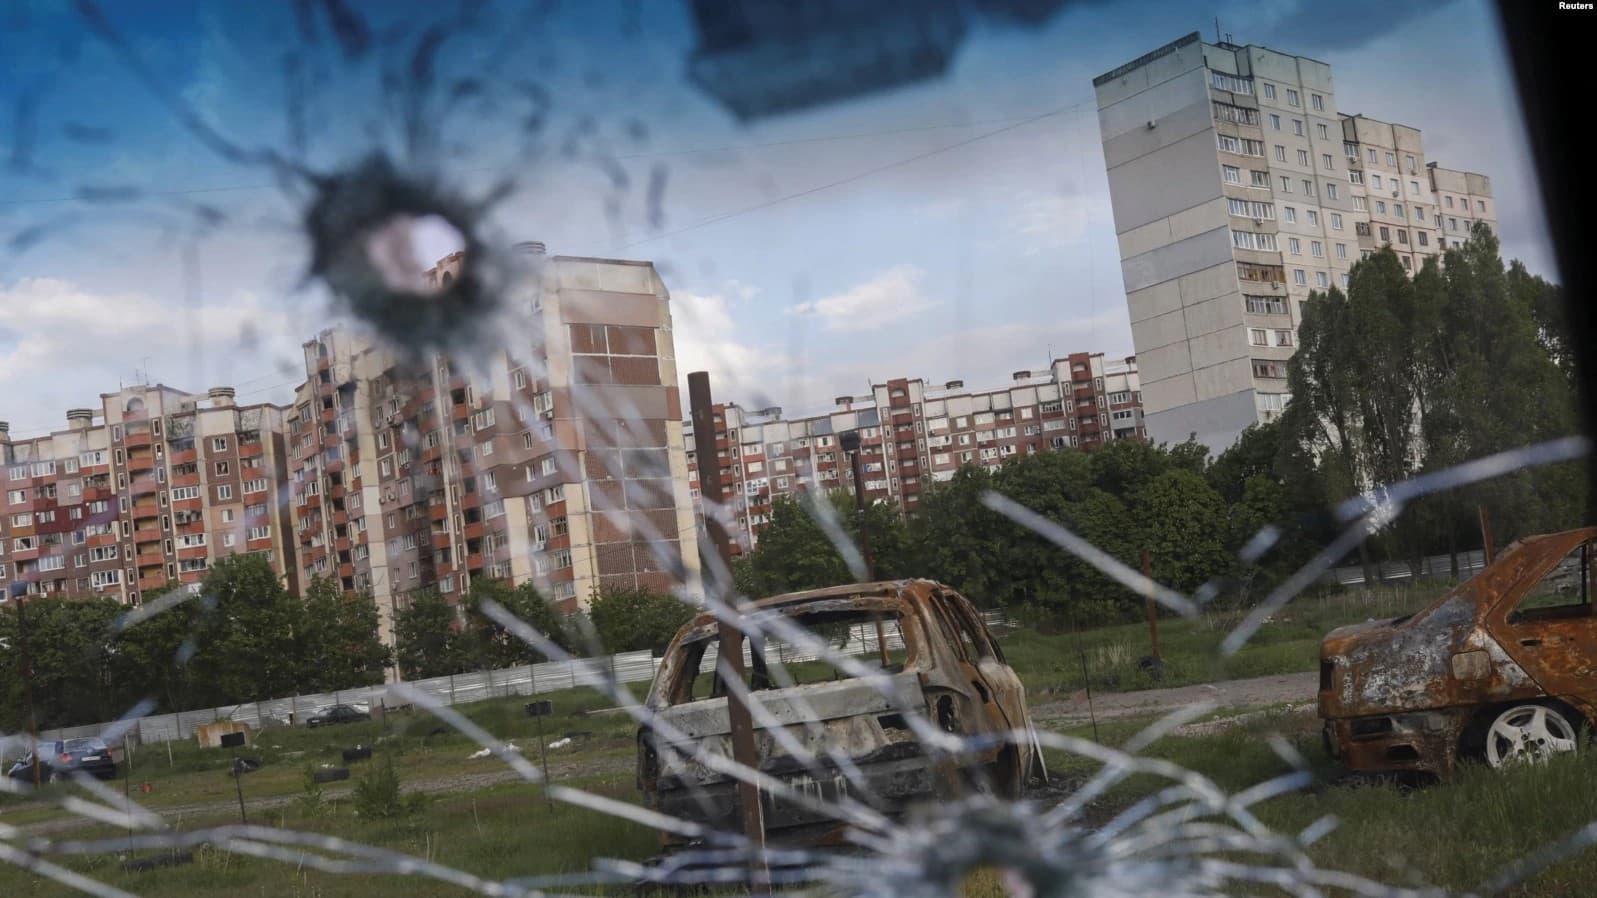 Burned cars are pictured through the glass of a damaged car in Kharkiv